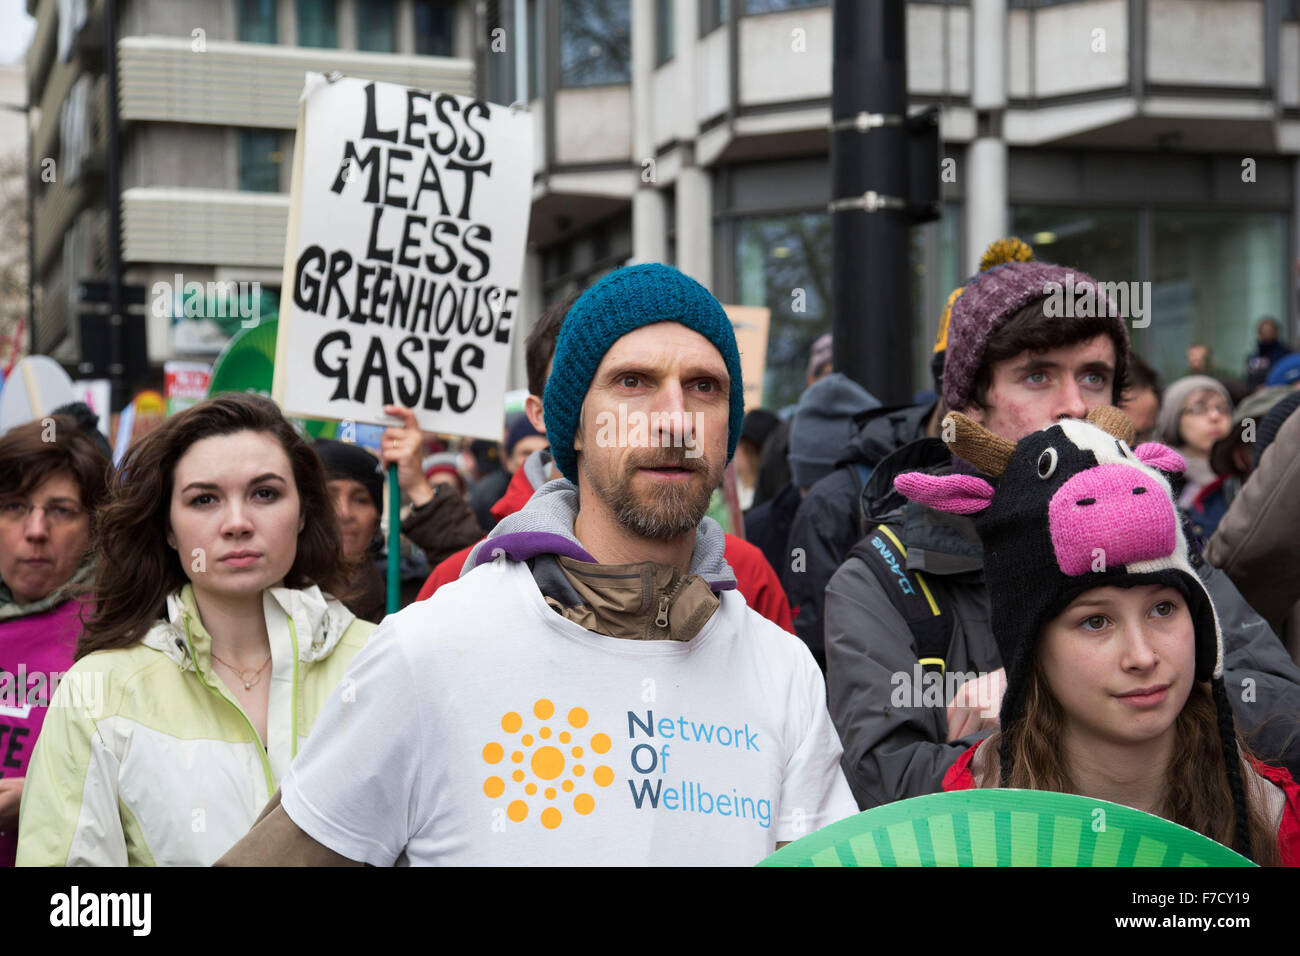 London, UK. Sunday 29th November 2015. Peoples March for Climate Justice and Jobs demonstration. Demonstrators gathered in their tens of thousands to protest against all kinds of environmental issues such as fracking, clean air, and alternative energies, prior to Major climate change talks. Stock Photo